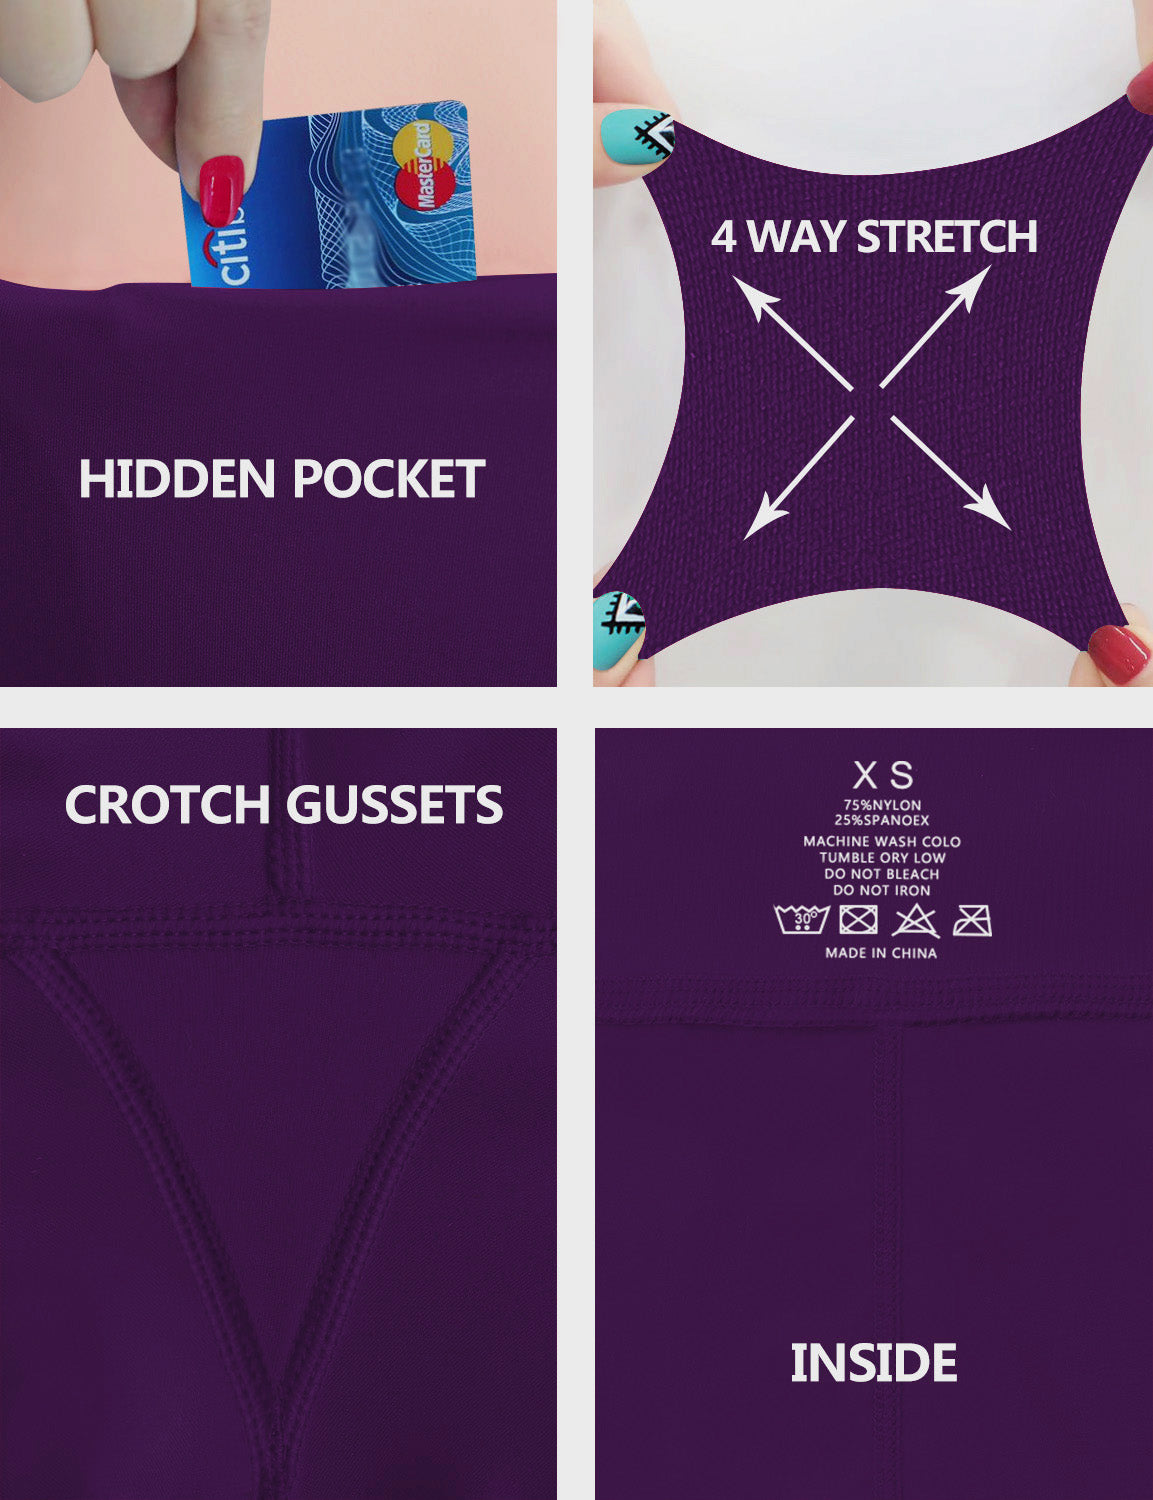 High Waist Side Pockets Jogging Pants eggplantpurple 75% Nylon, 25% Spandex Fabric doesn't attract lint easily 4-way stretch No see-through Moisture-wicking Tummy control Inner pocket